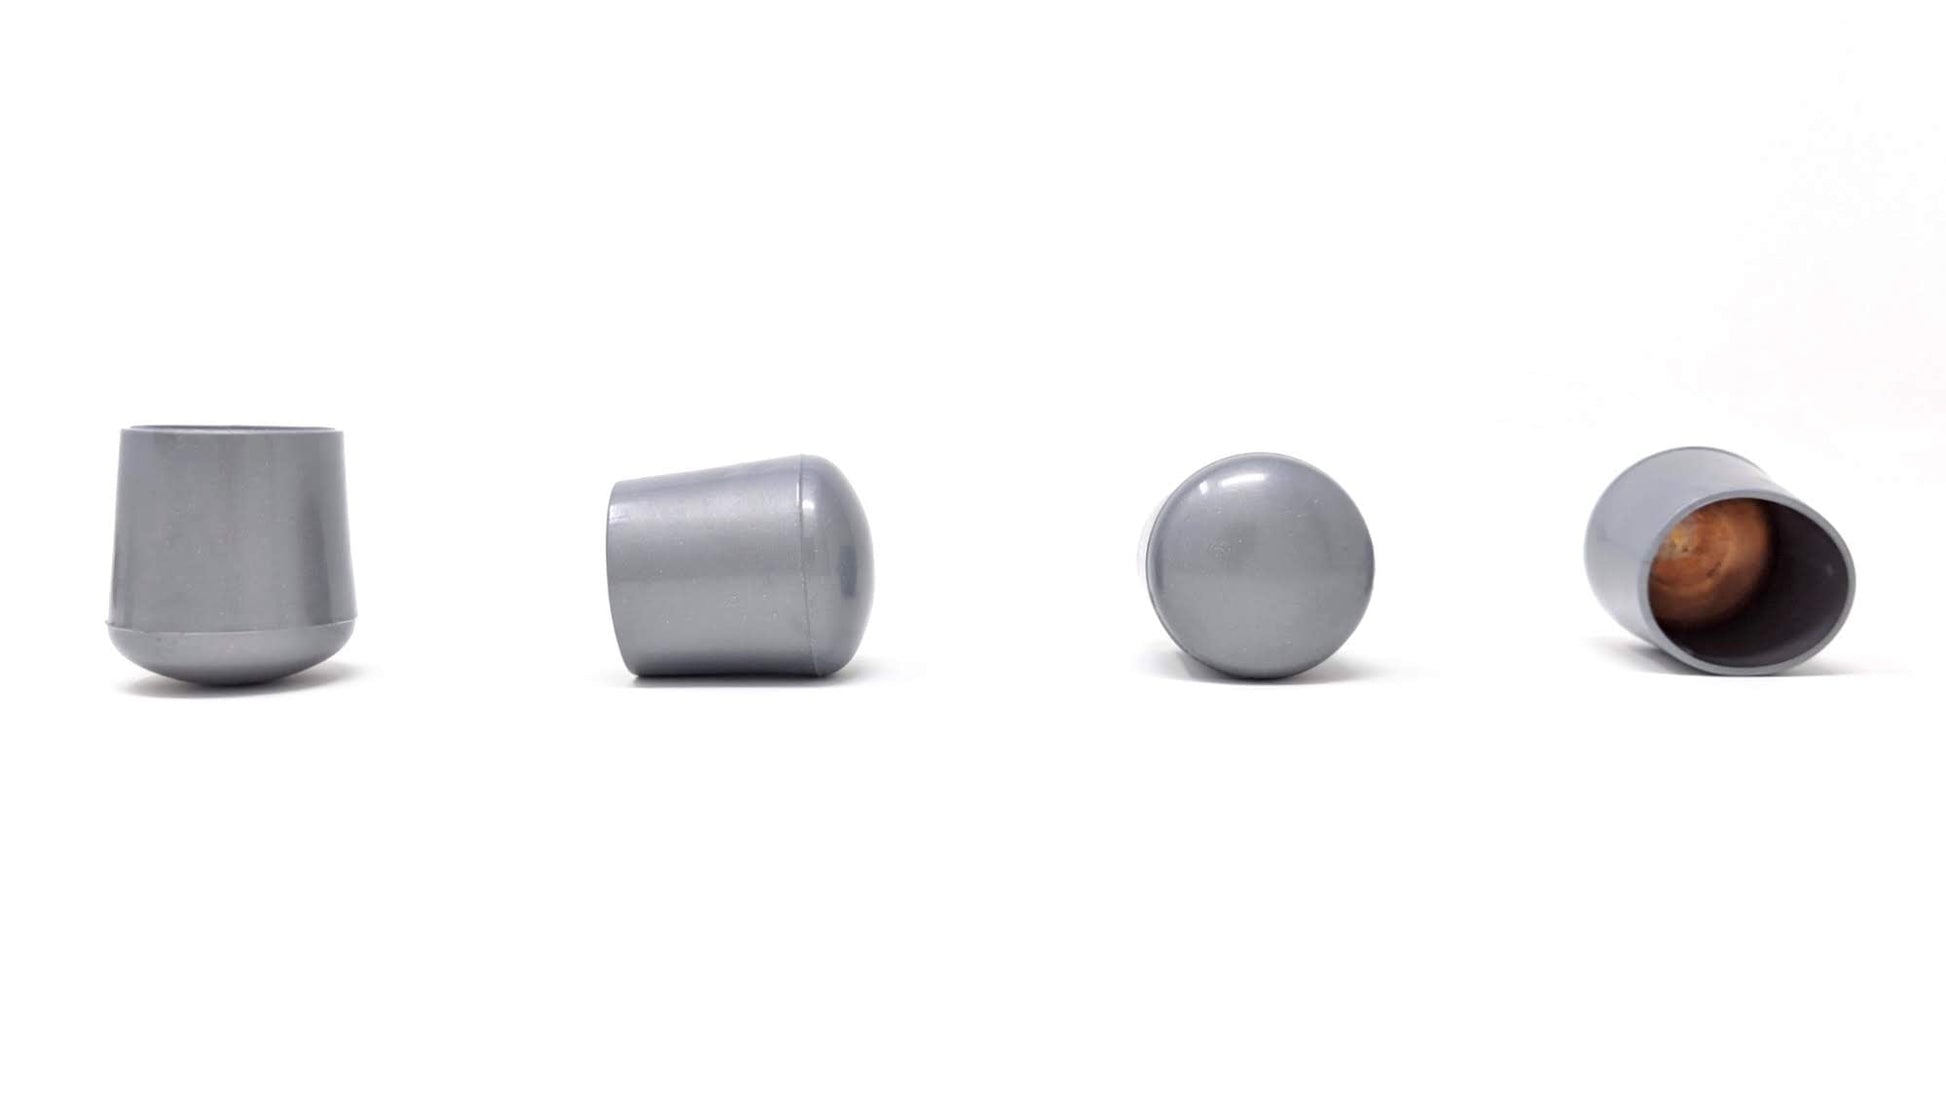 28mm Grey Rubber Ferrules with Steel Base Insert - Made in Germany - Keay Vital Parts